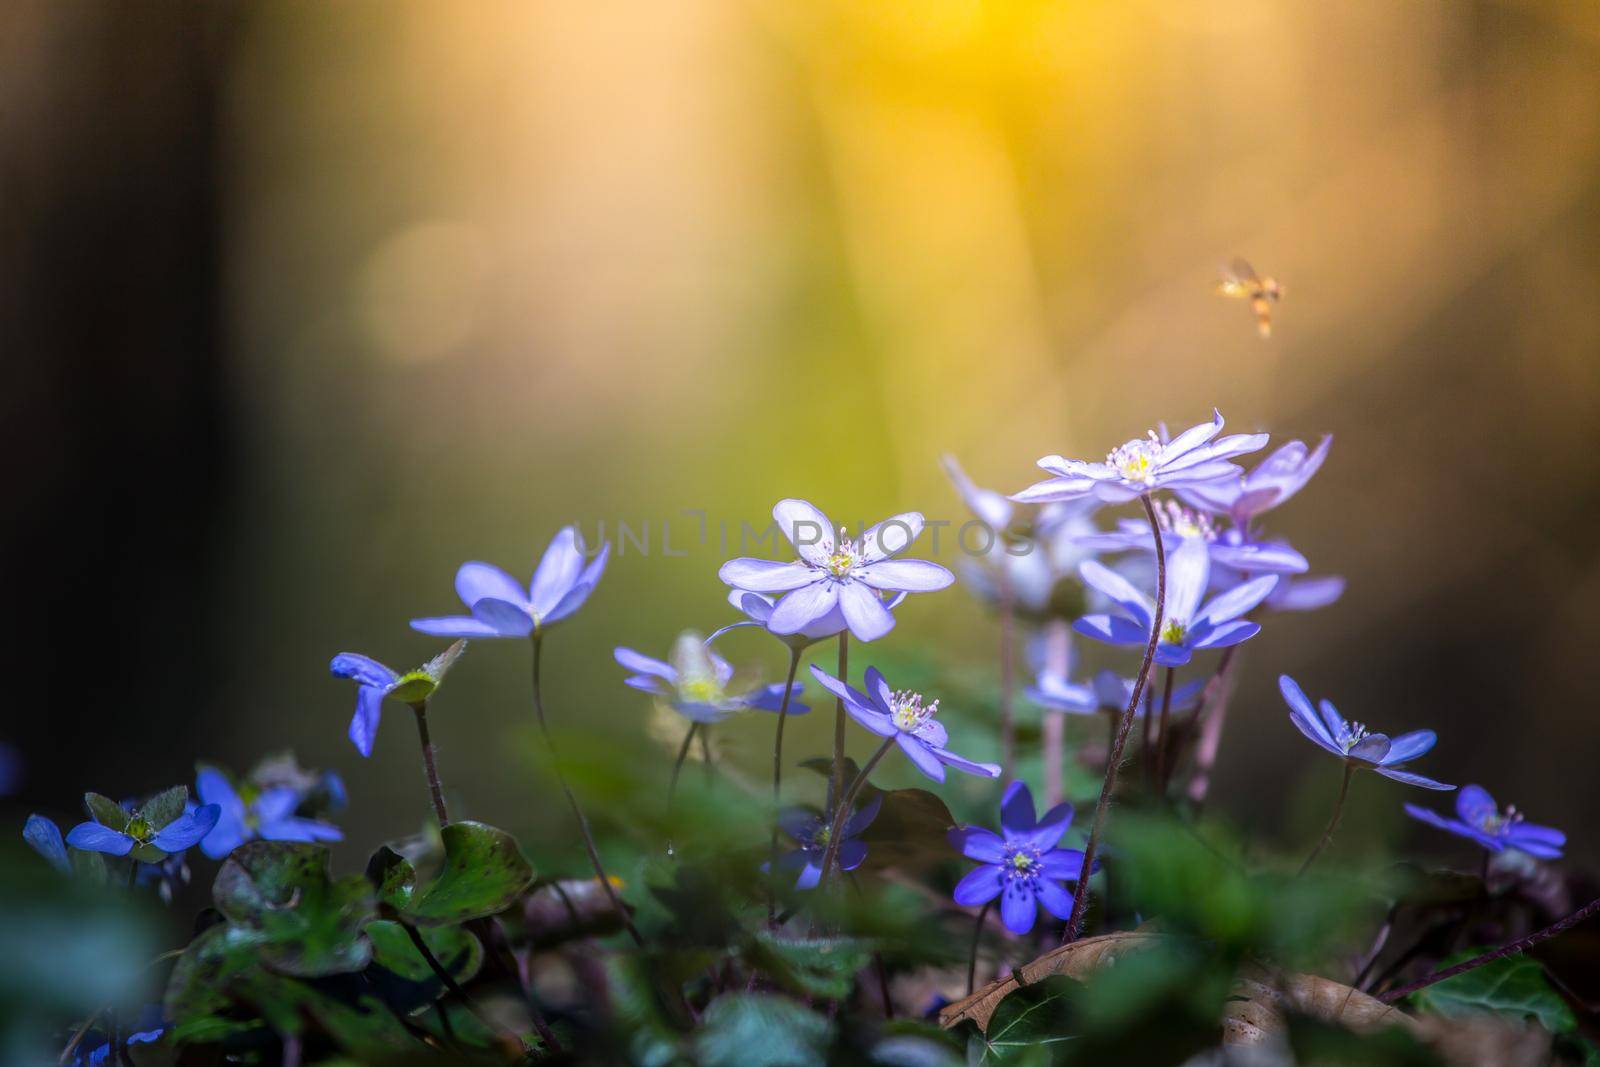 Close up of violet spring flowers, magic atmosphere